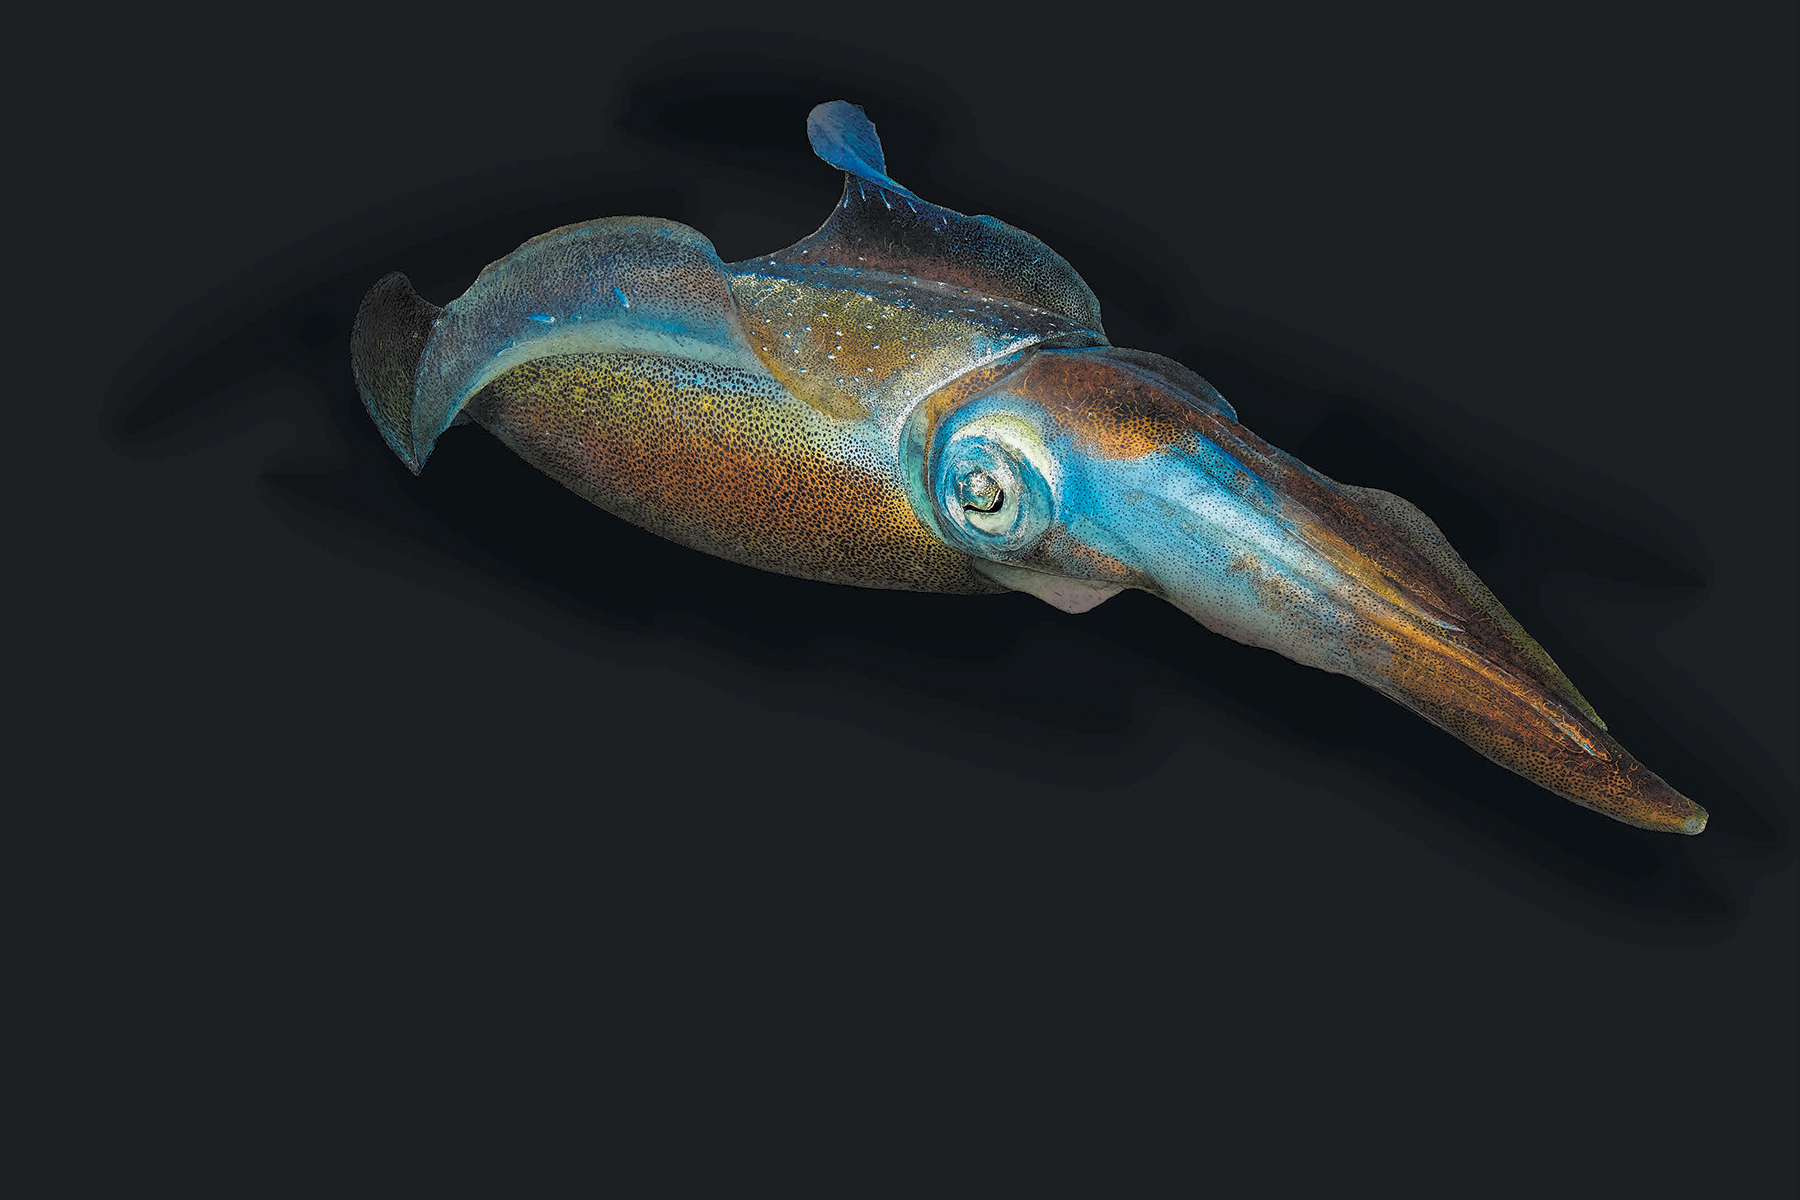 Bigfin reef squid by Ben Rothery in Water World